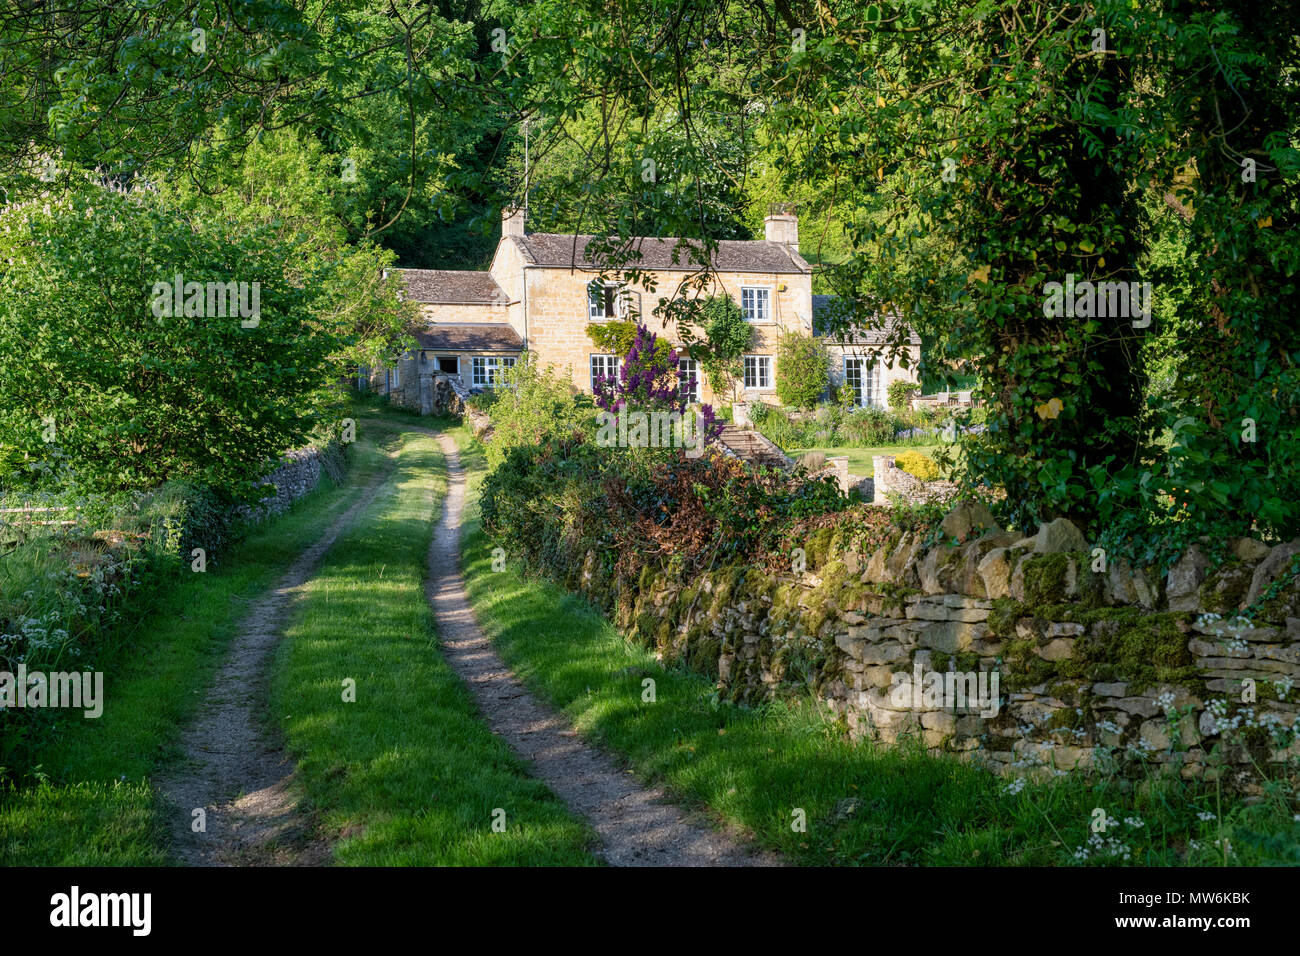 Abend Lujiang im cotswold Dorf Turkdean. Turkdean, Cotswolds, Gloucestershire, England Stockfoto